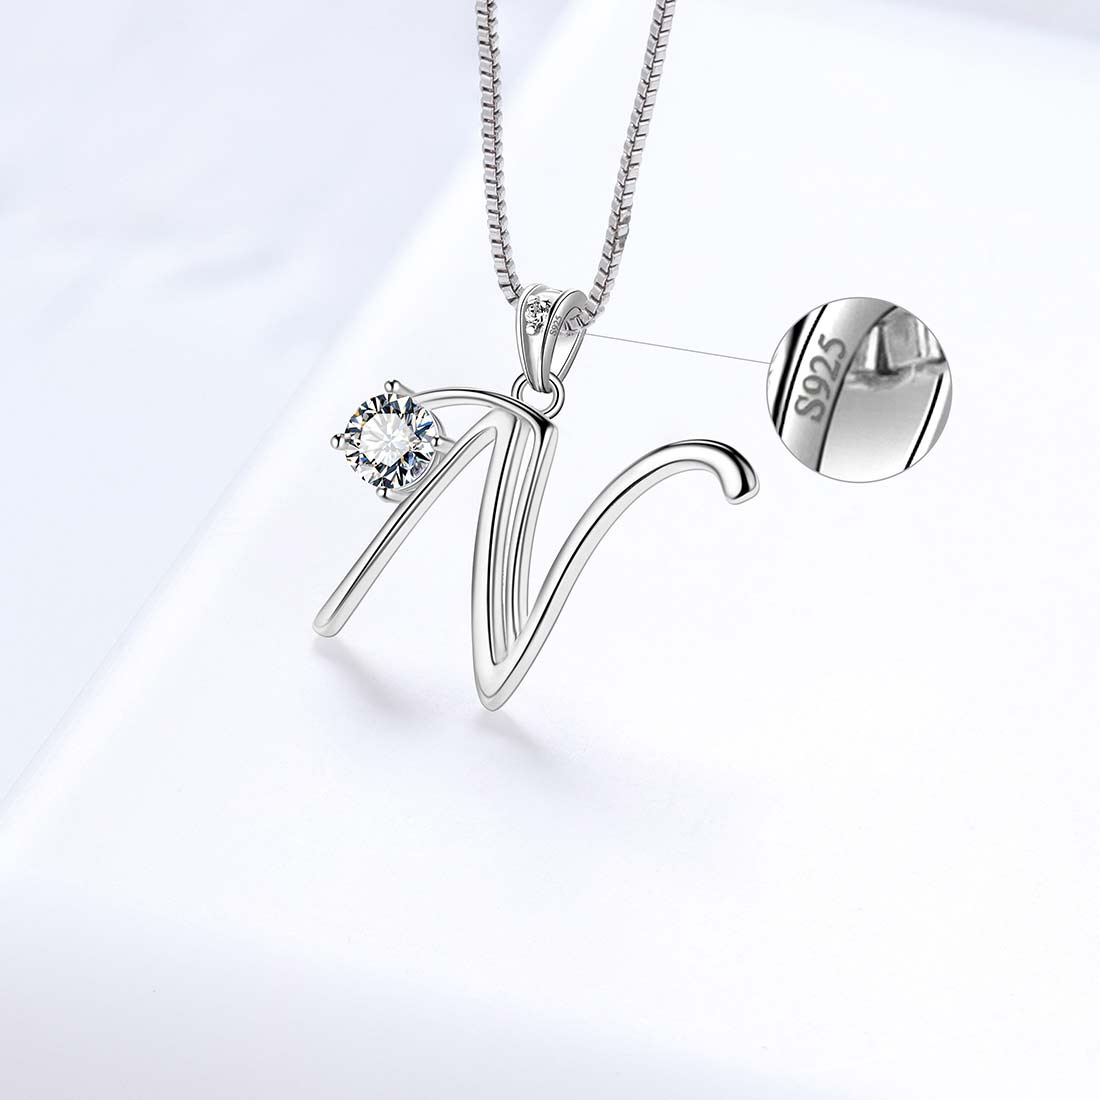 Women Letter N Initial Necklaces Sterling Silver - Necklaces - Aurora Tears Jewelry